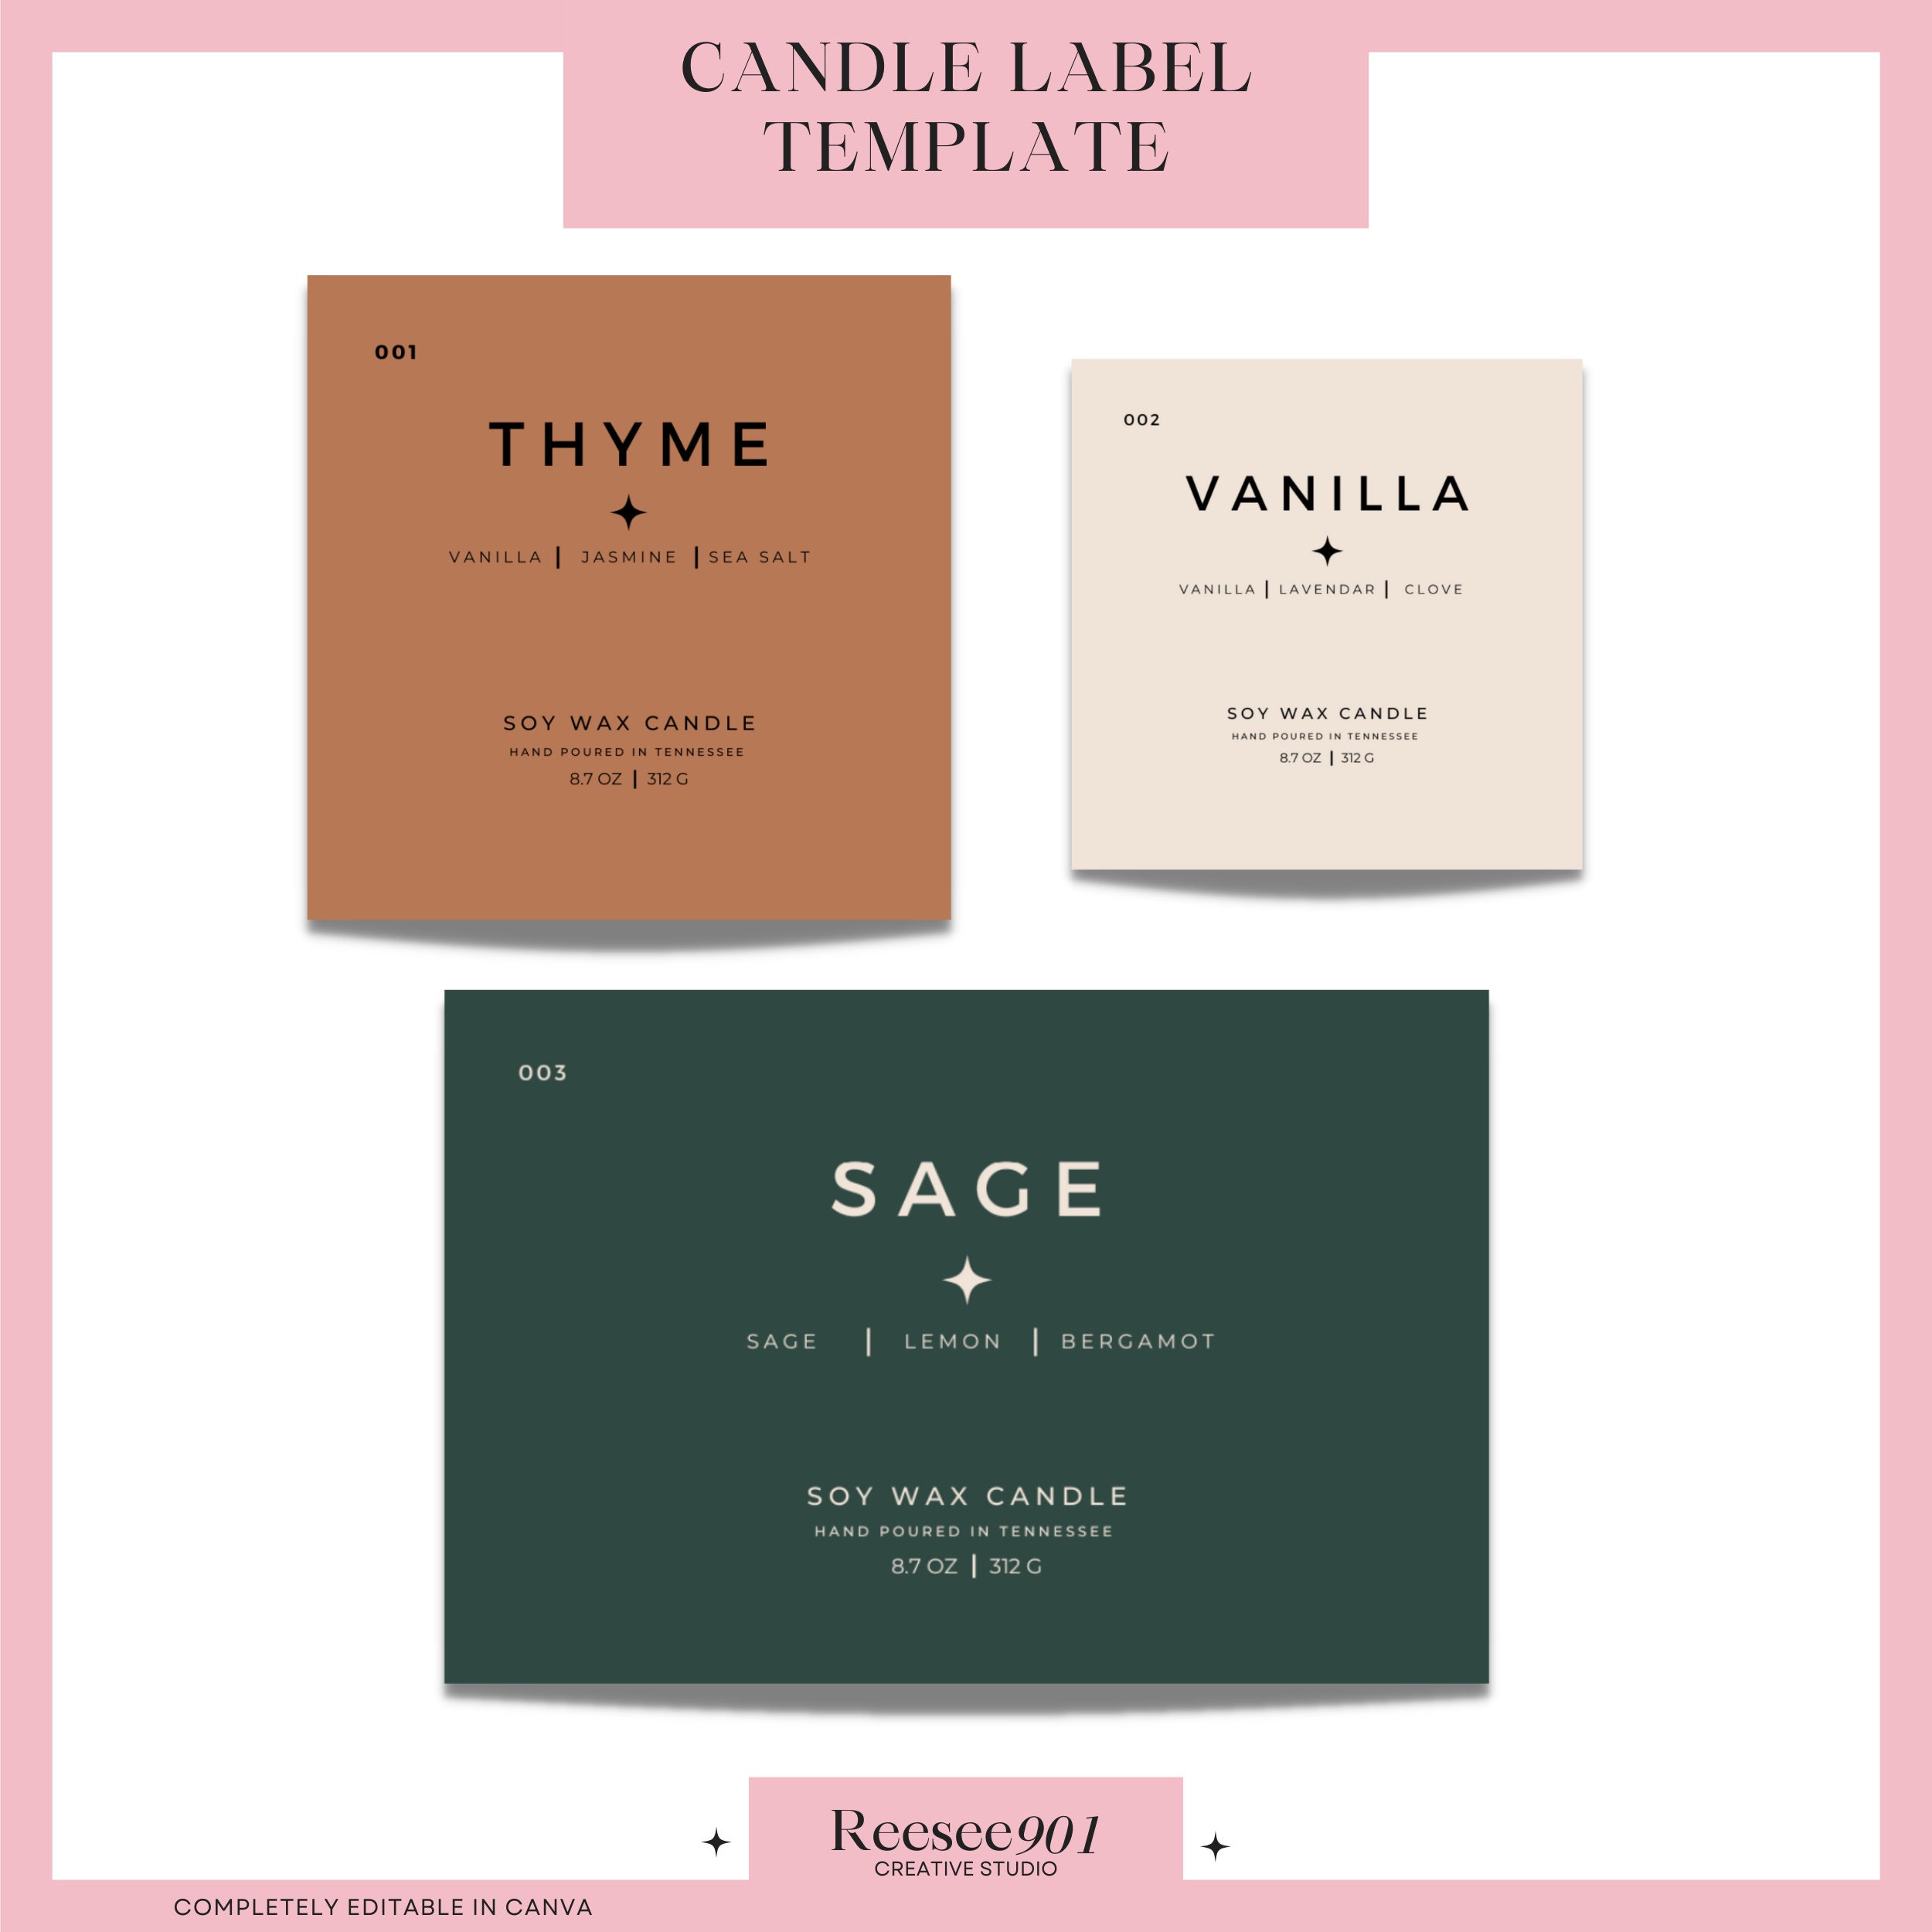 Fall Candle Label Template, Editable Candle Label Design